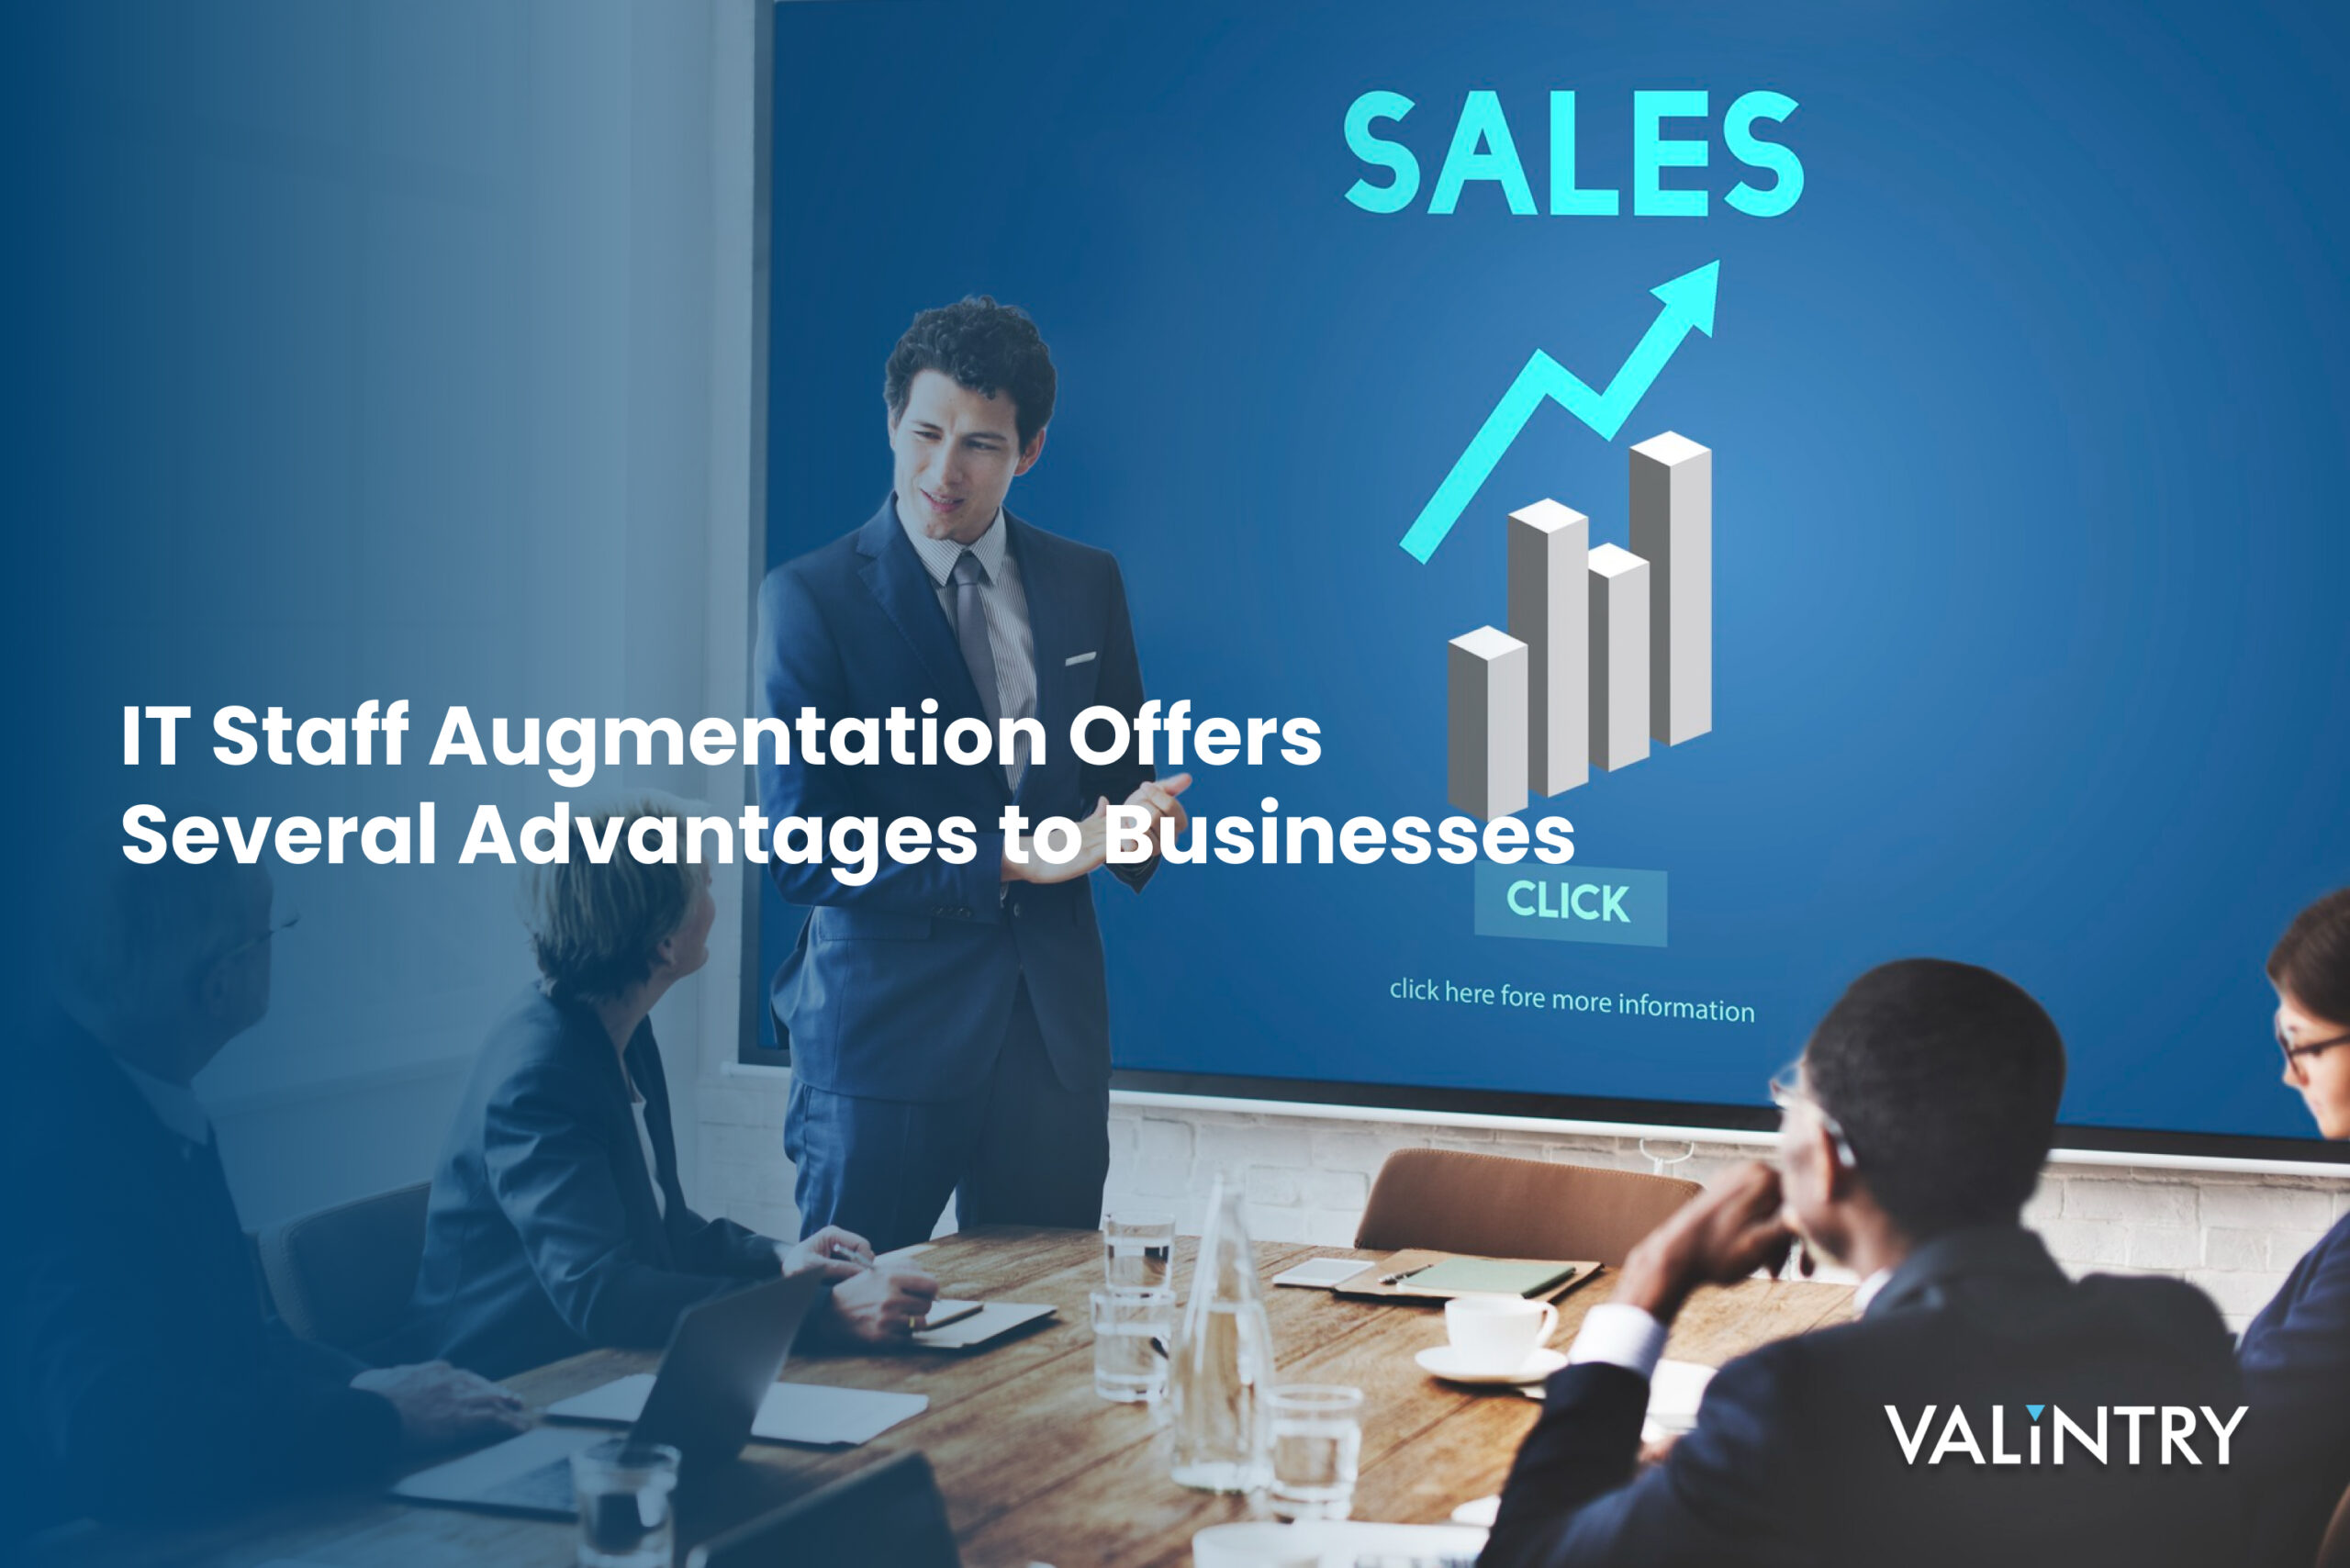 IT Staff Augmentation Offers Several Advantages to Businesses